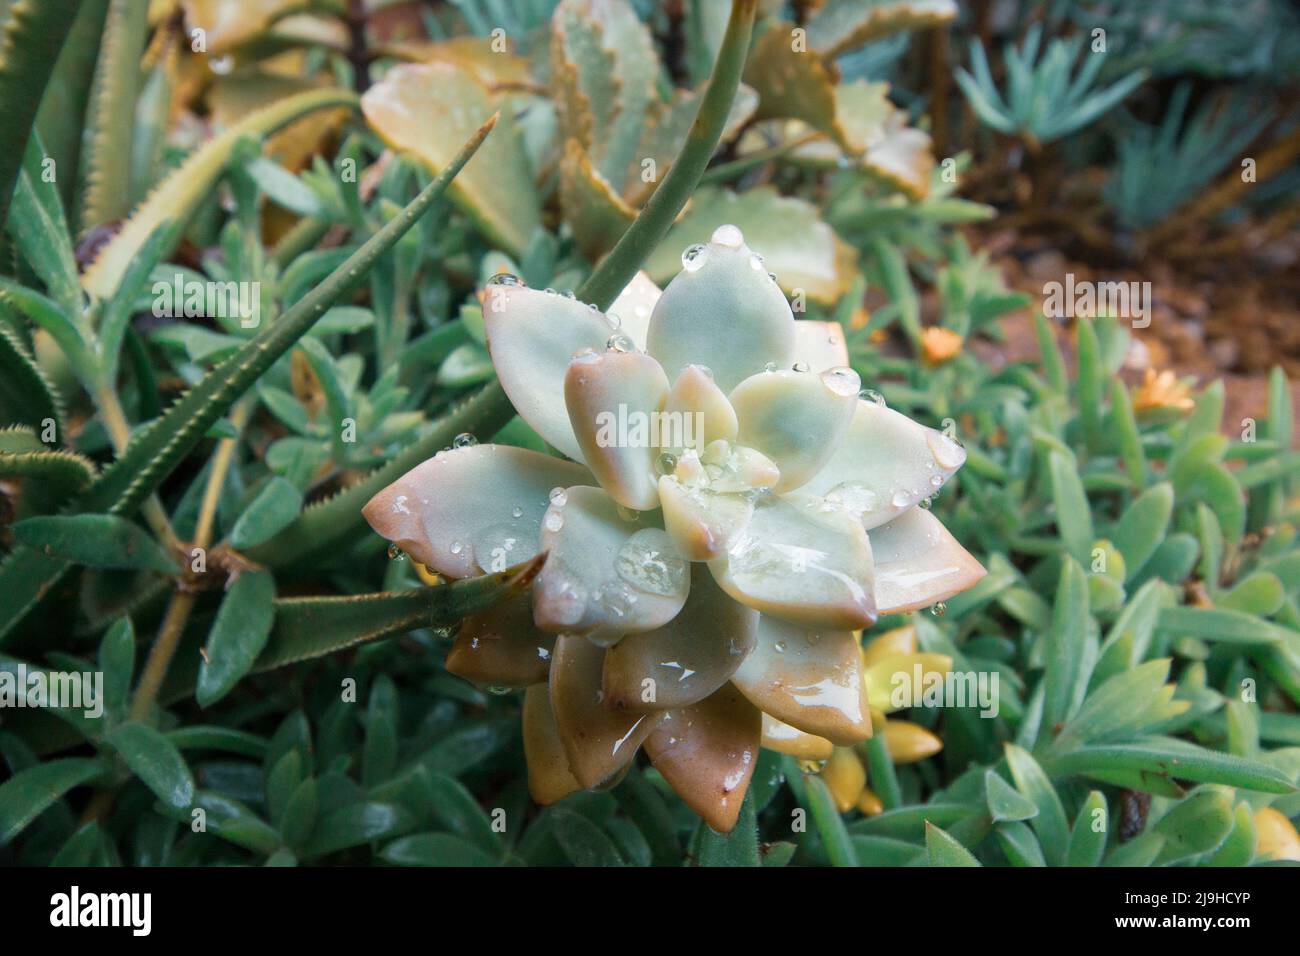 A close up view of a succulent or rock rose in sepia with water droplets on. Stock Photo